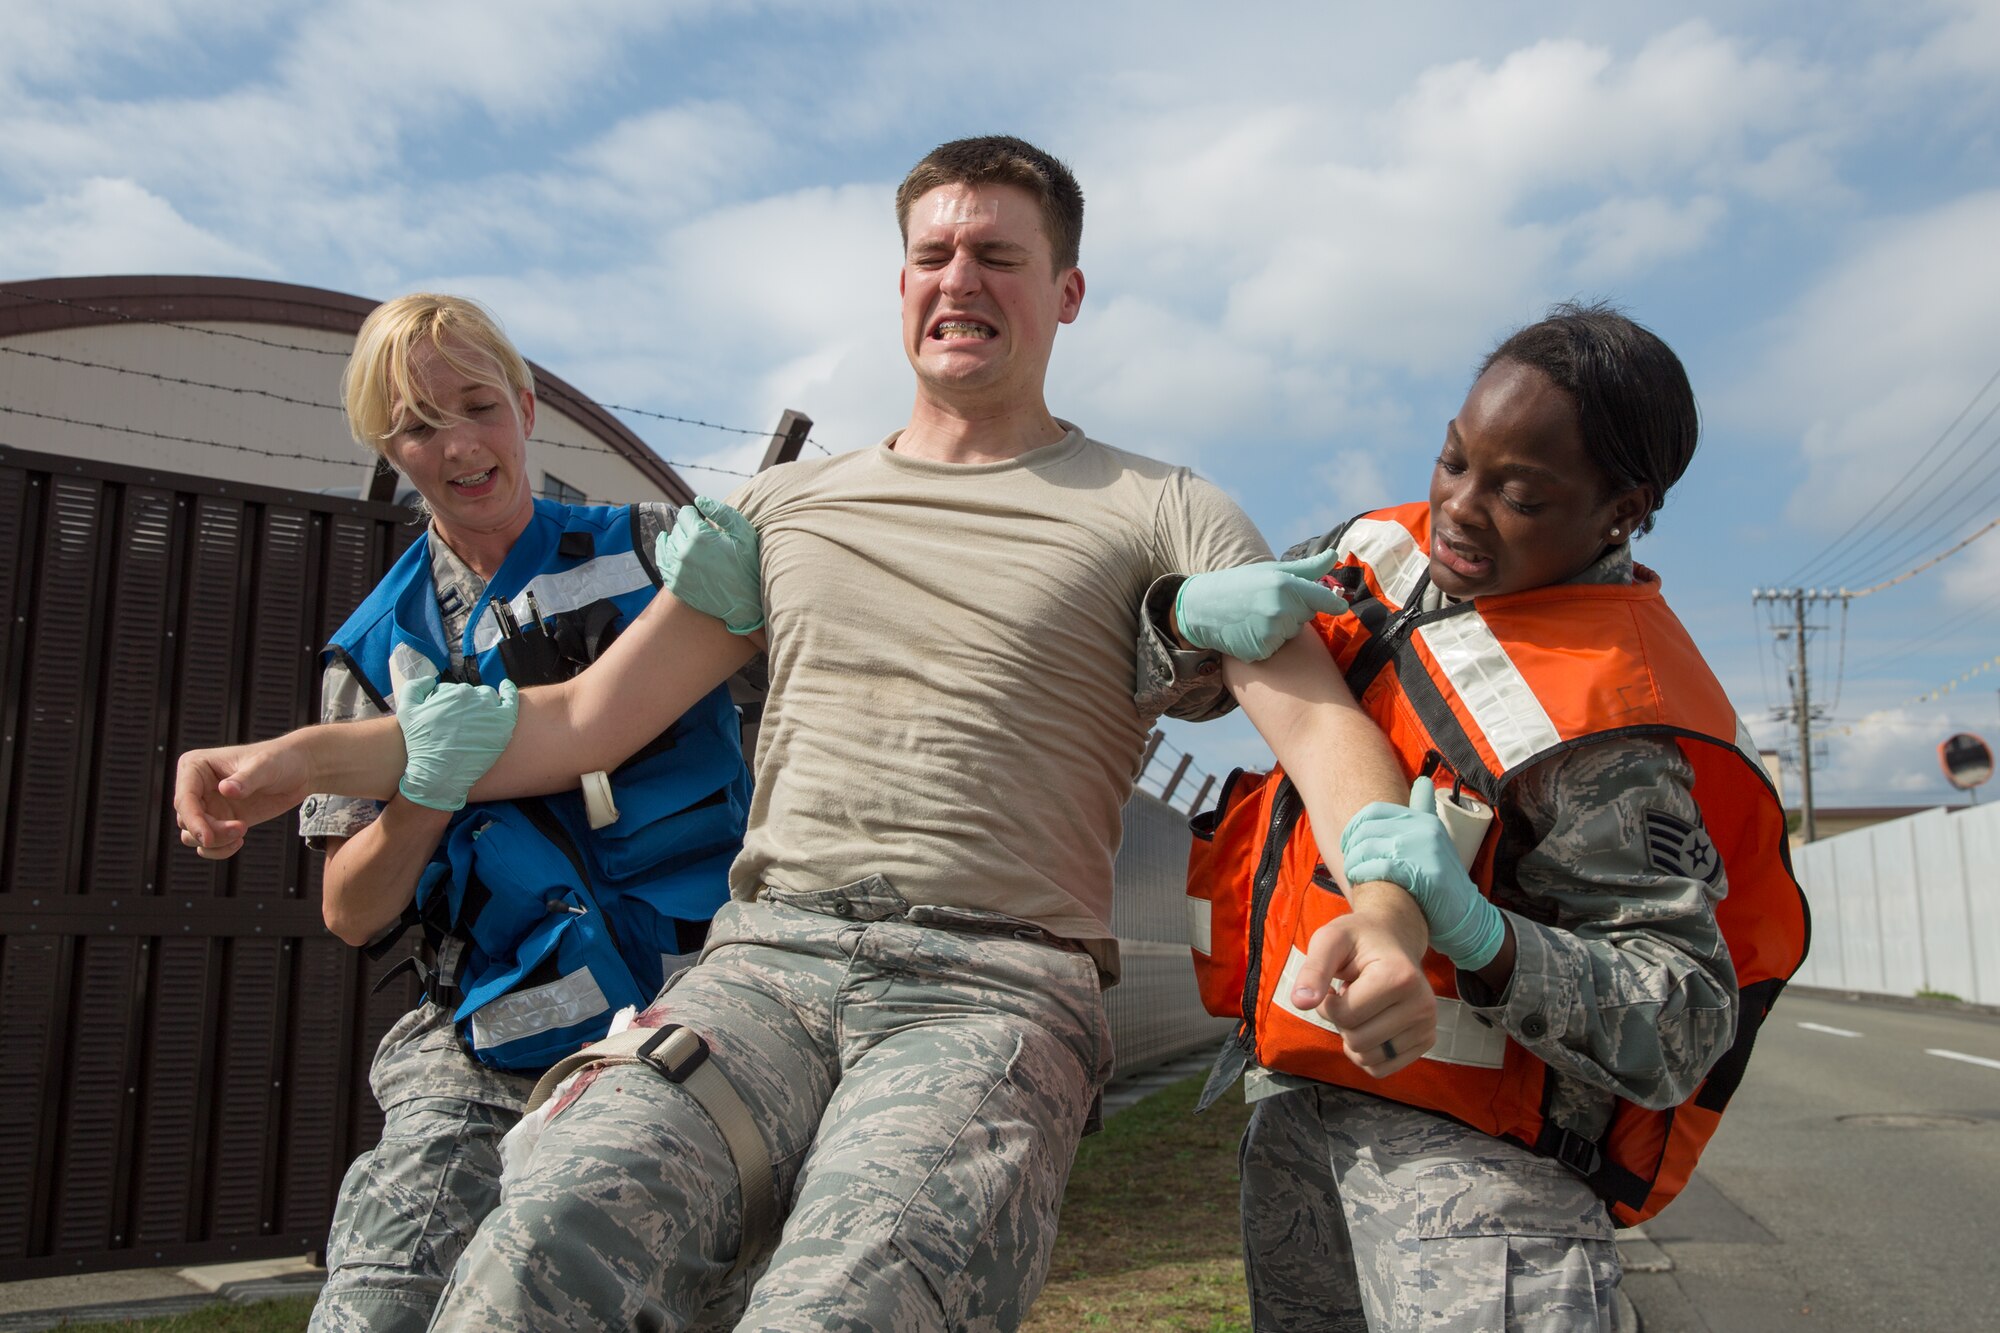 (From left to right) Capt. Rebecca Cupp, 374th Aerospace Medicine Squadron, and Staff Sgt. Raven Taylor, 374th Surgical Operations Squadron, transport a simulated injured victim during an active shooter scenario at Yokota Air Base, Japan, Oct. 10, 2013. Throughout her career, Taylor has stood out amongst her peers as a superior performer. She was selected for promotion to senior airman below the zone and achieved the rank of staff sergeant her first time testing. (U.S. Air Force photo by Osakabe Yasuo/Released)